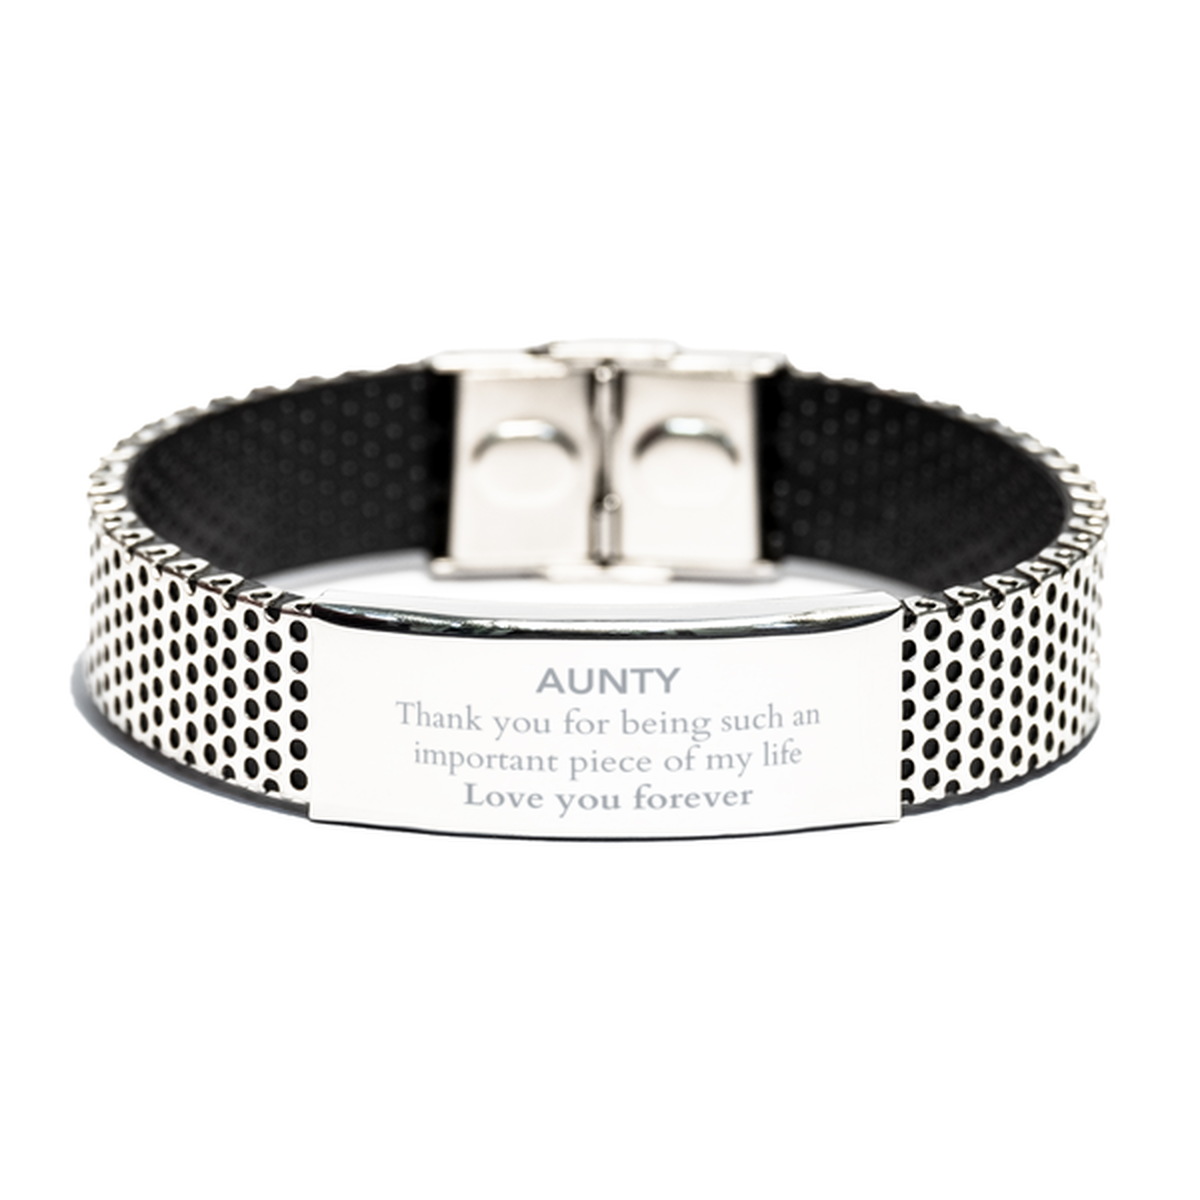 Appropriate Aunty Stainless Steel Bracelet Epic Birthday Gifts for Aunty Thank you for being such an important piece of my life Aunty Christmas Mothers Fathers Day